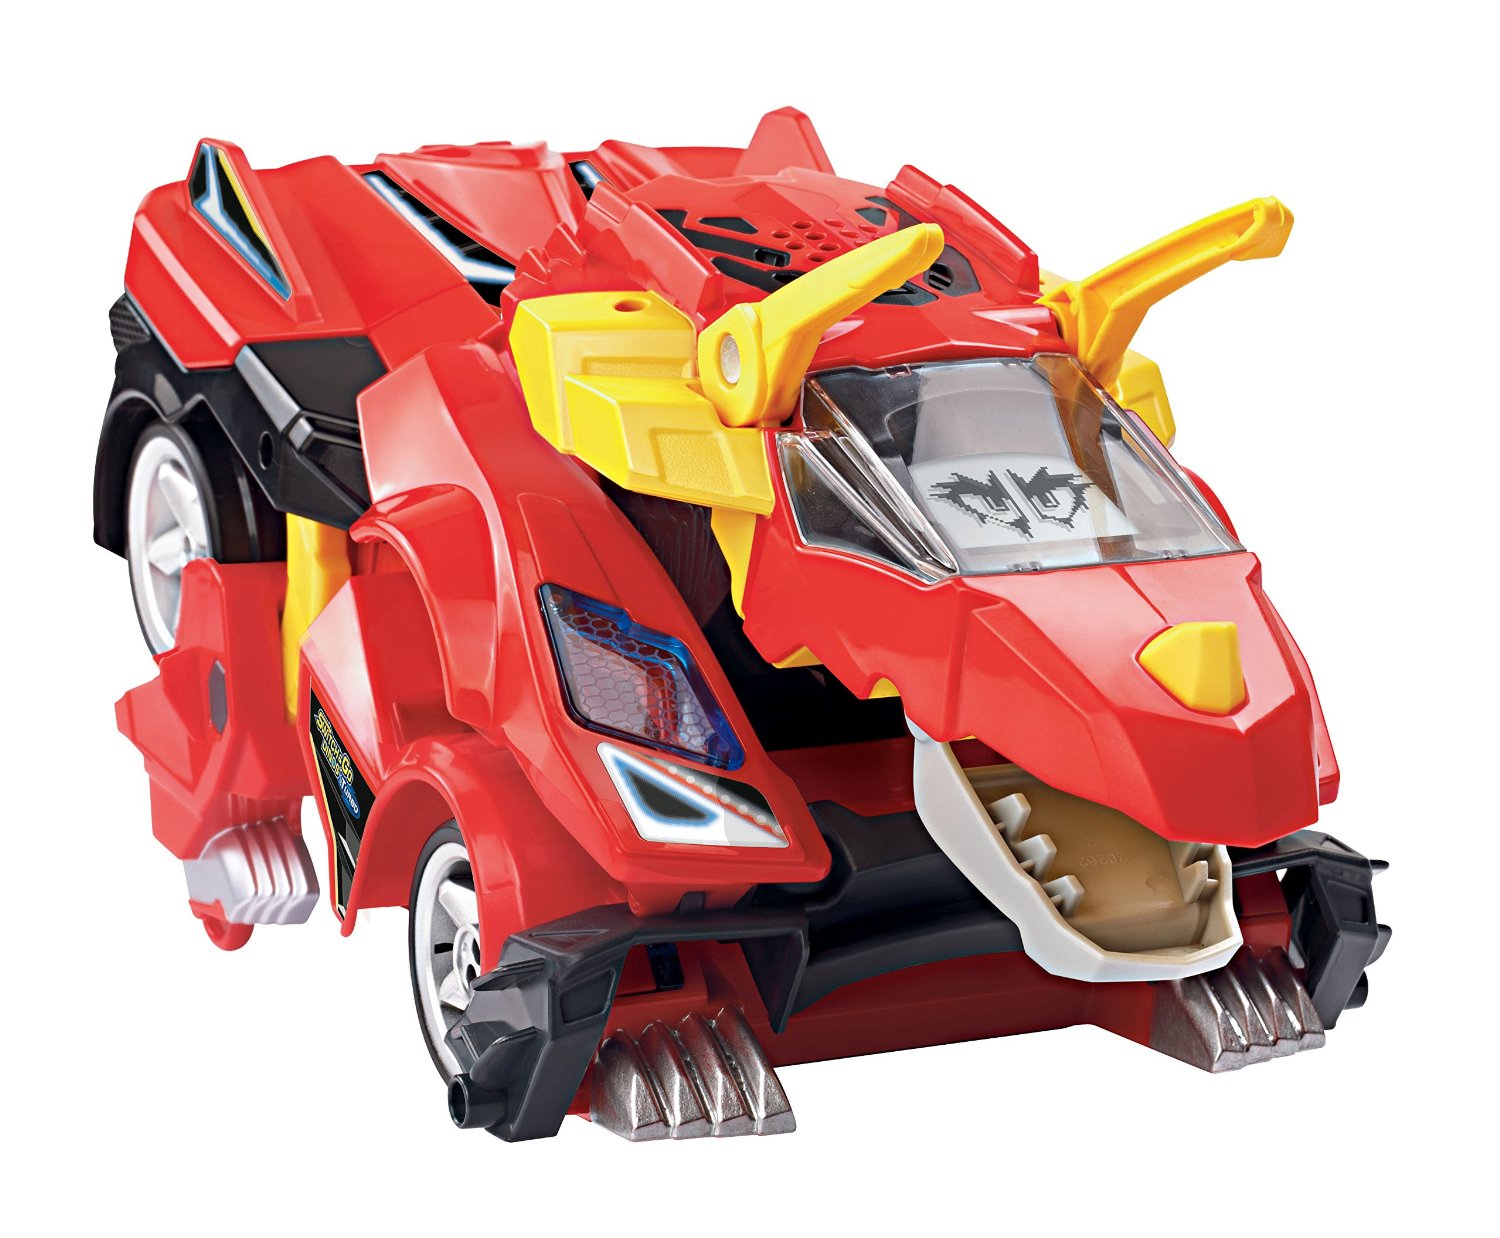 Switch and Go Dinos Turbo Bronco The RC Triceratops Vehicle Only $22.76 (Reg. $44.99)